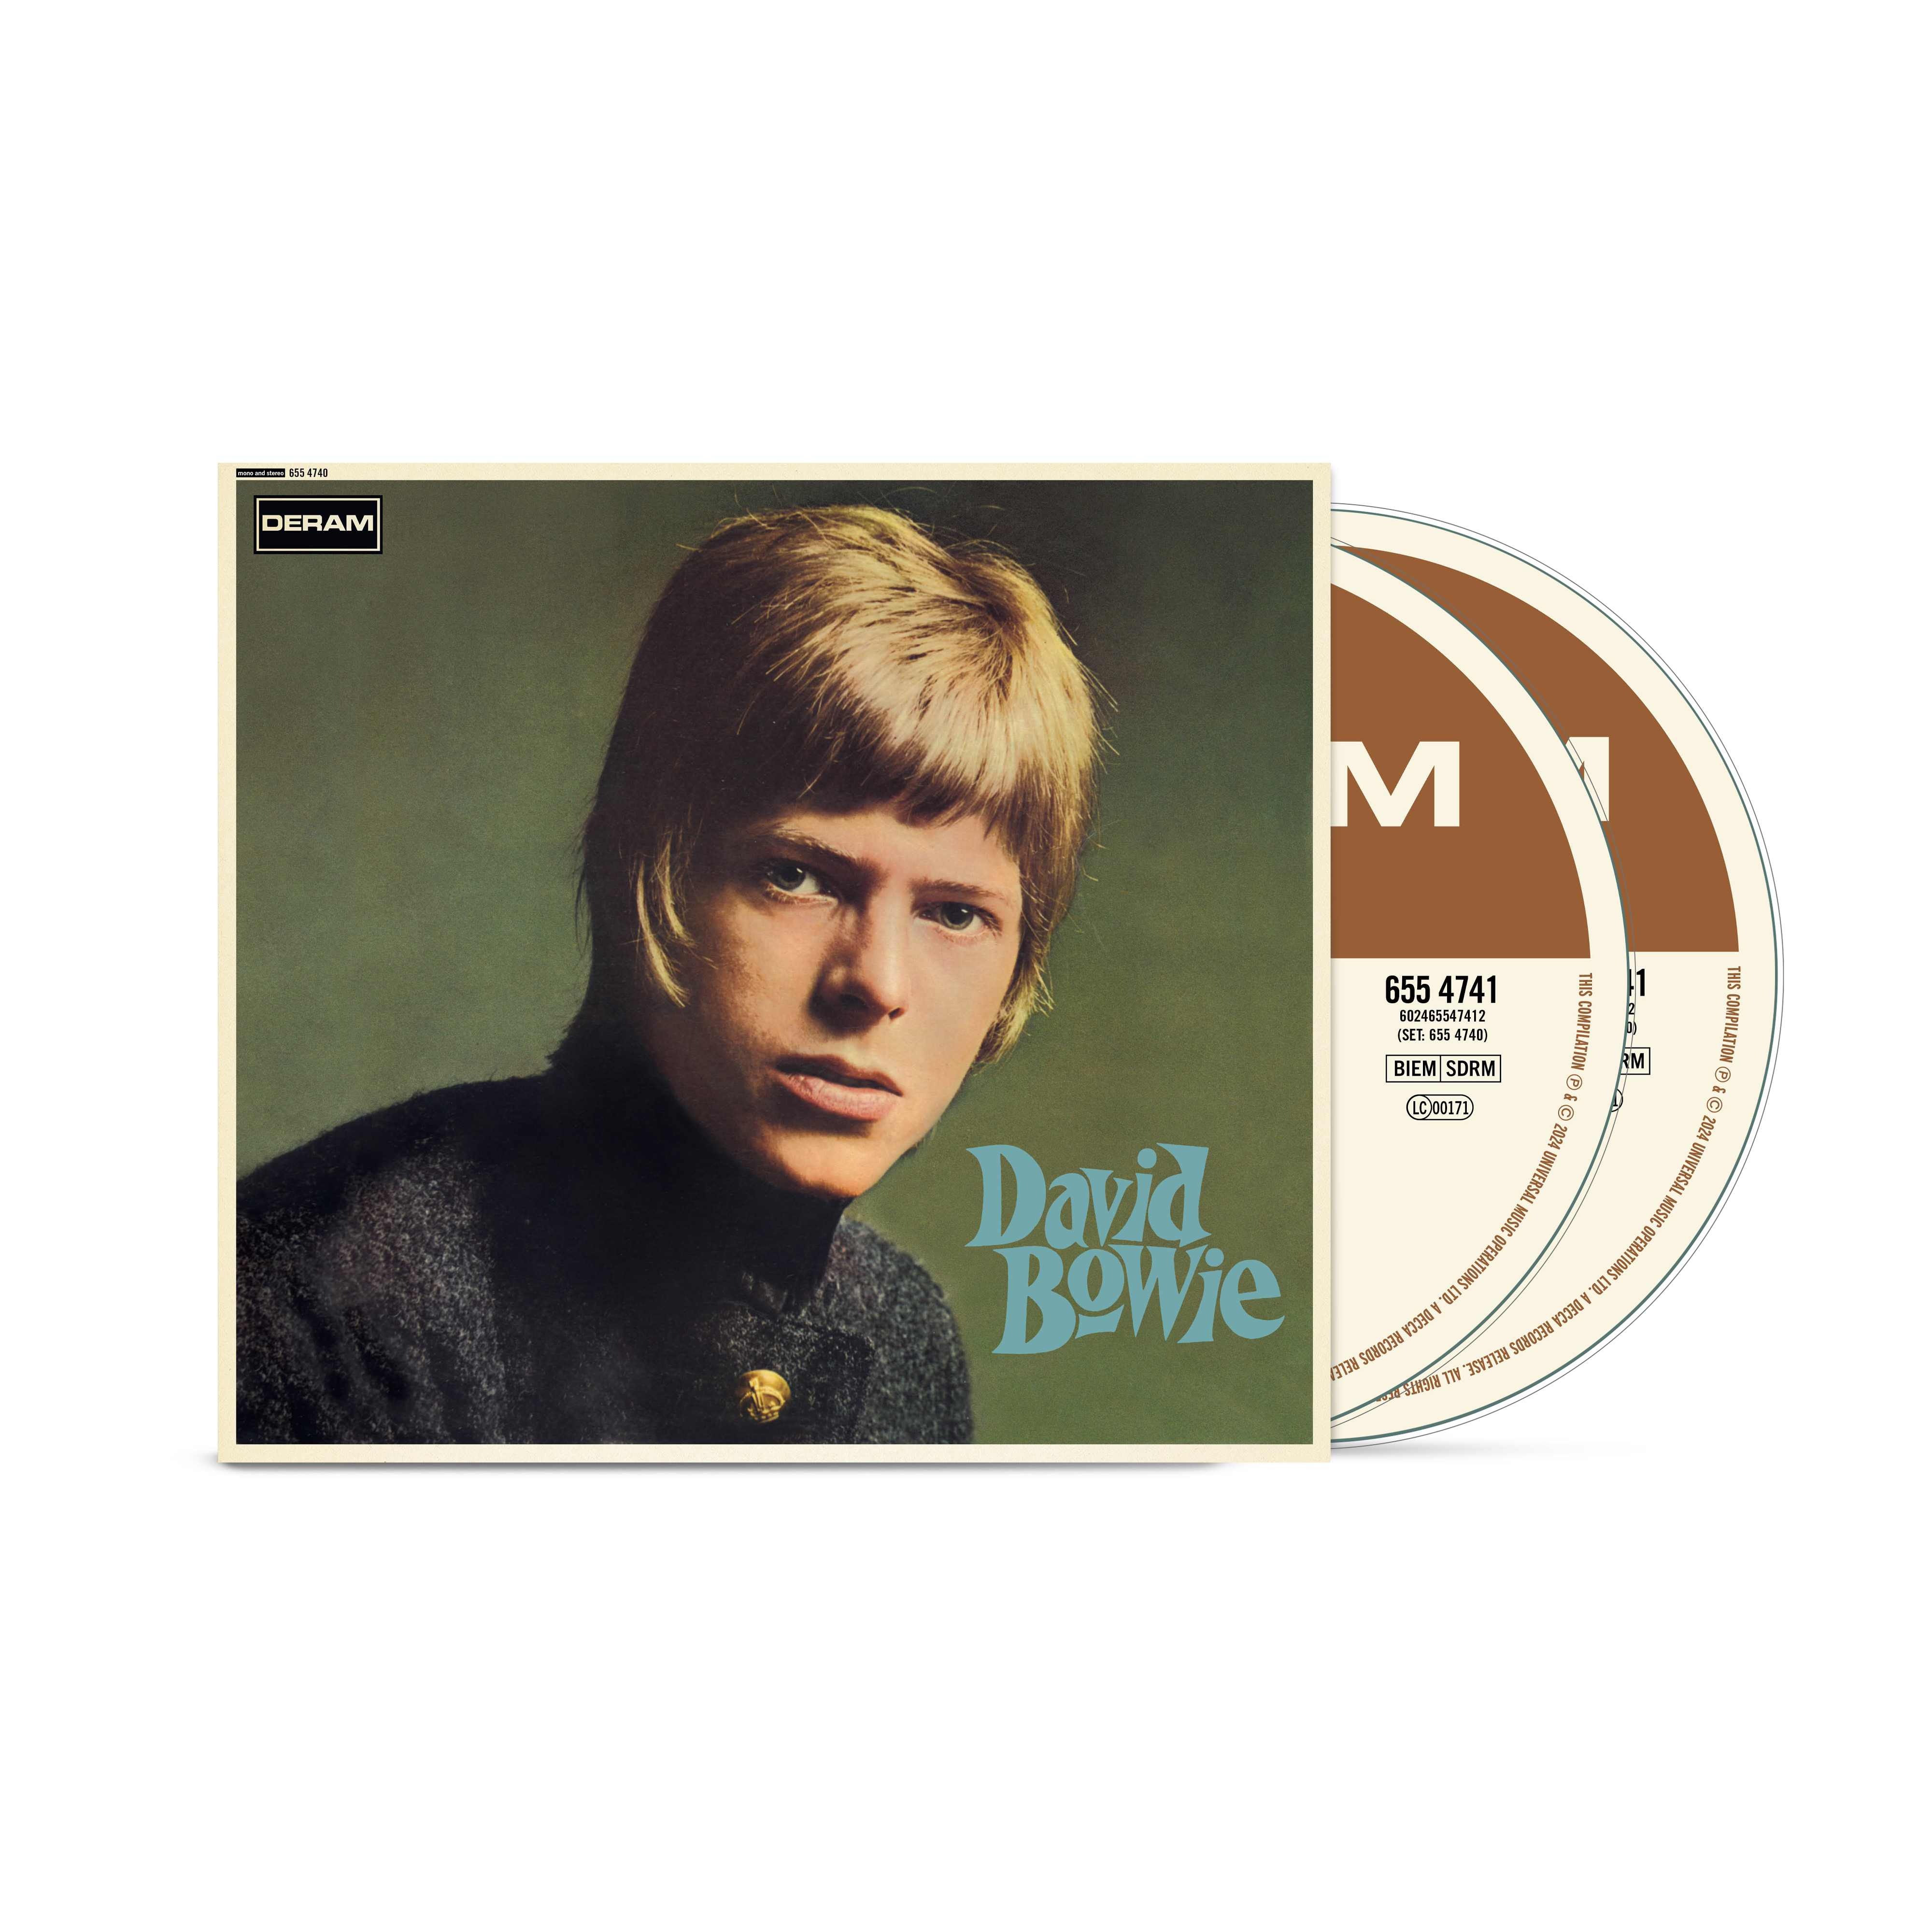 David Bowie - David Bowie: Deluxe Edition [2CD] - uDiscover